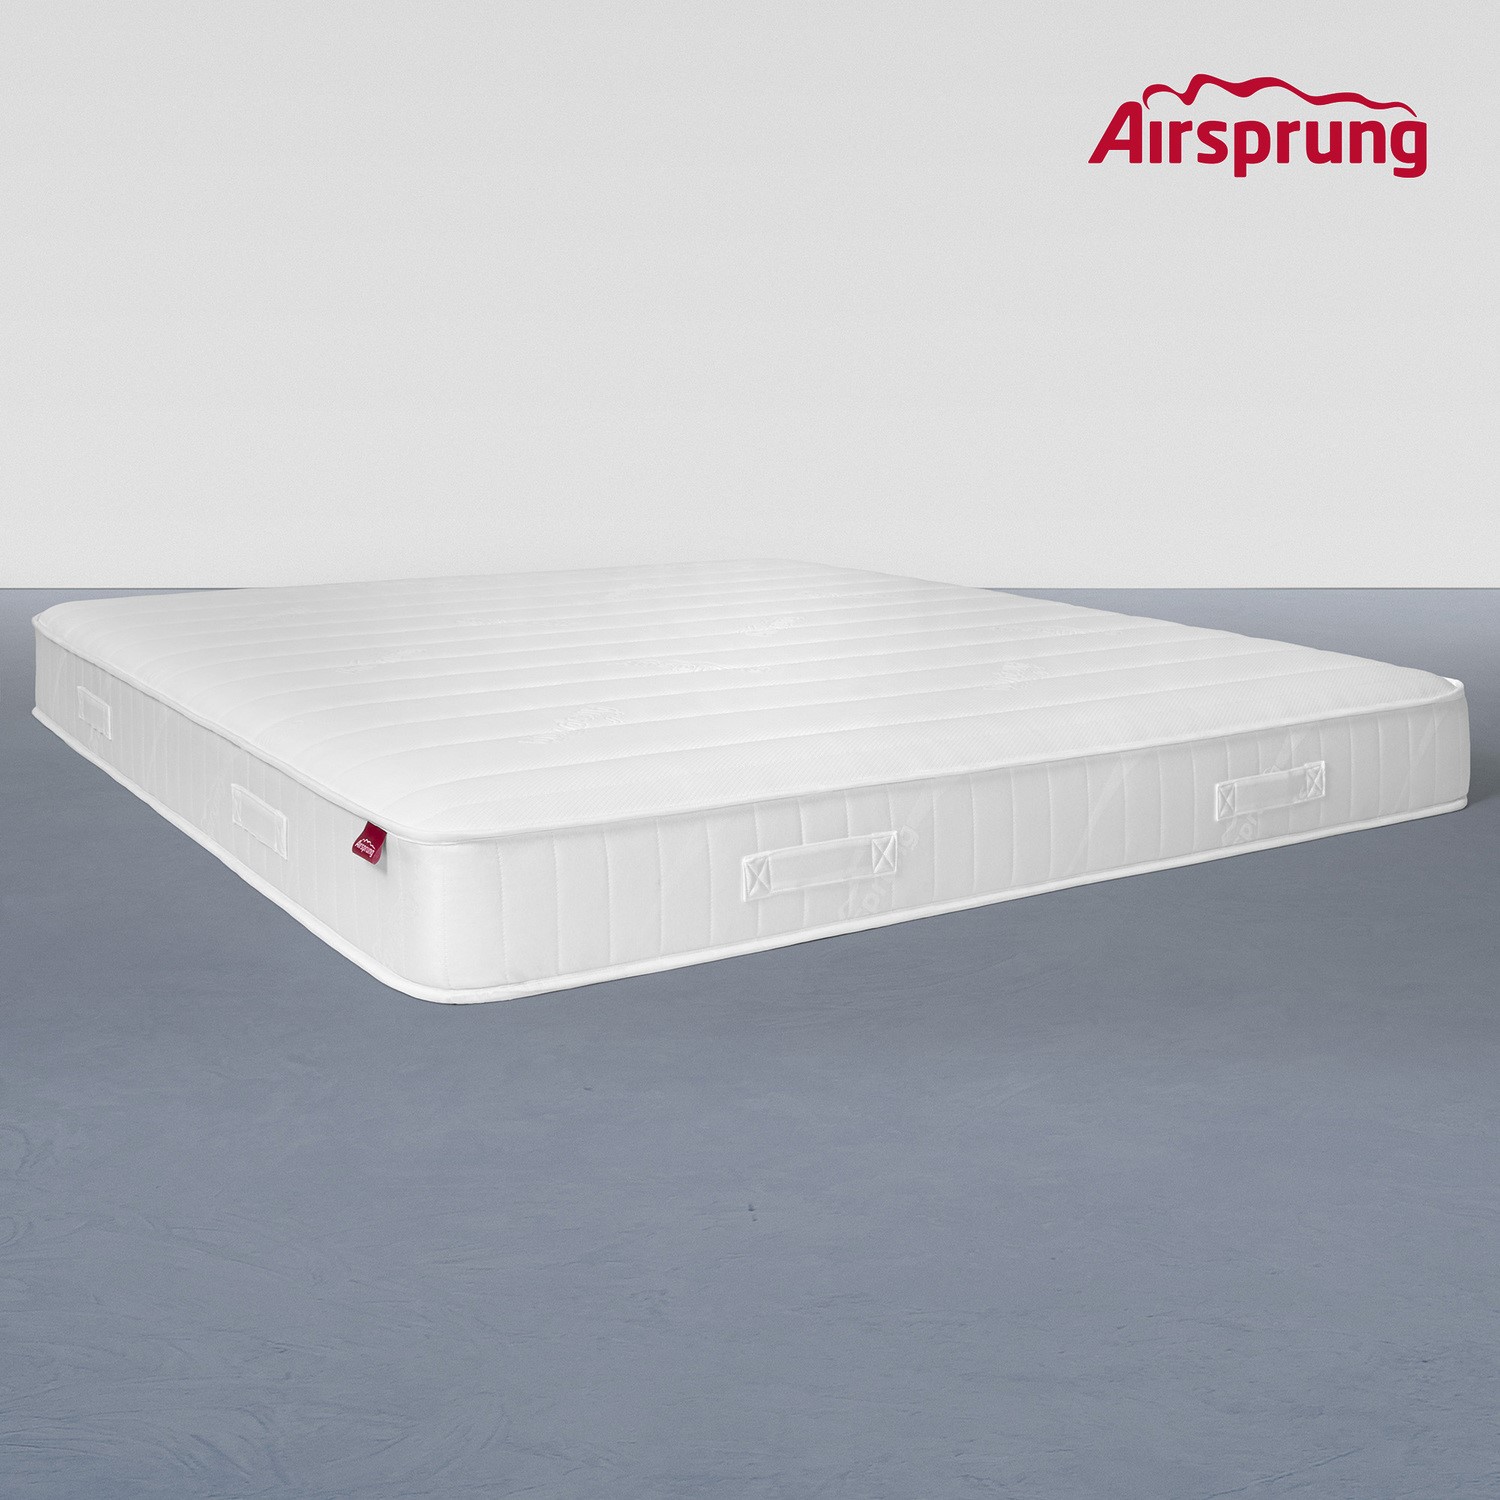 Read more about King size 1000 pocket sprung rolled recycled fibre mattress airsprung